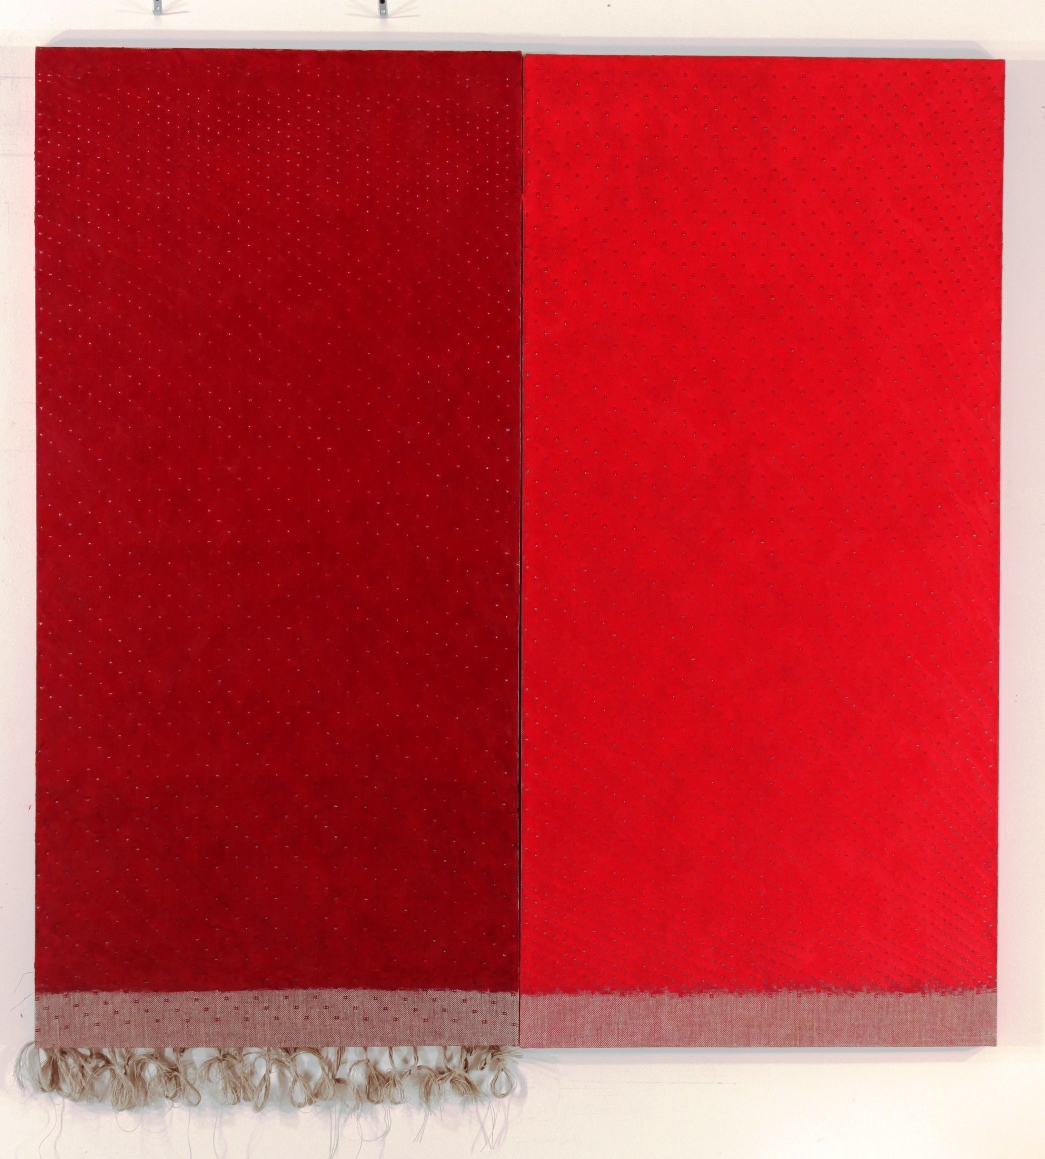 Anders Knutsson: Red Diptych